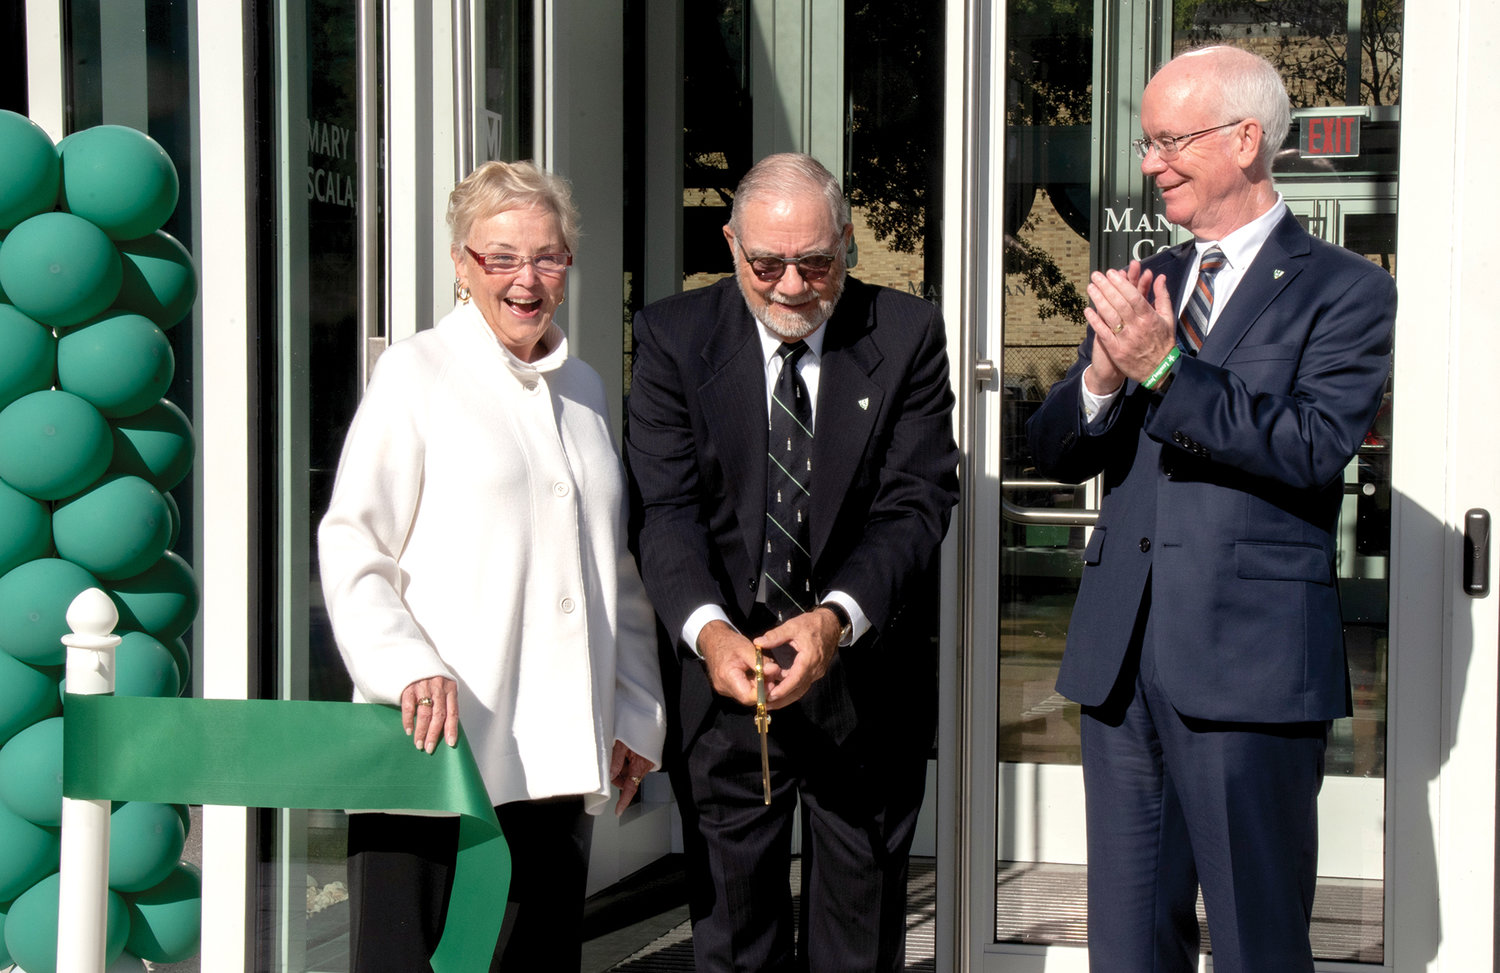 Cornelius Higgins cuts the ribbon at the formal dedication of Manhattan College’s Patricia and Cornelius J. Higgins '62 Engineering and Science Center in the Bronx Oct. 21. Joining Higgins are Patricia Higgins, Ph.D., and Brennan O’Donnell, president of Manhattan College.